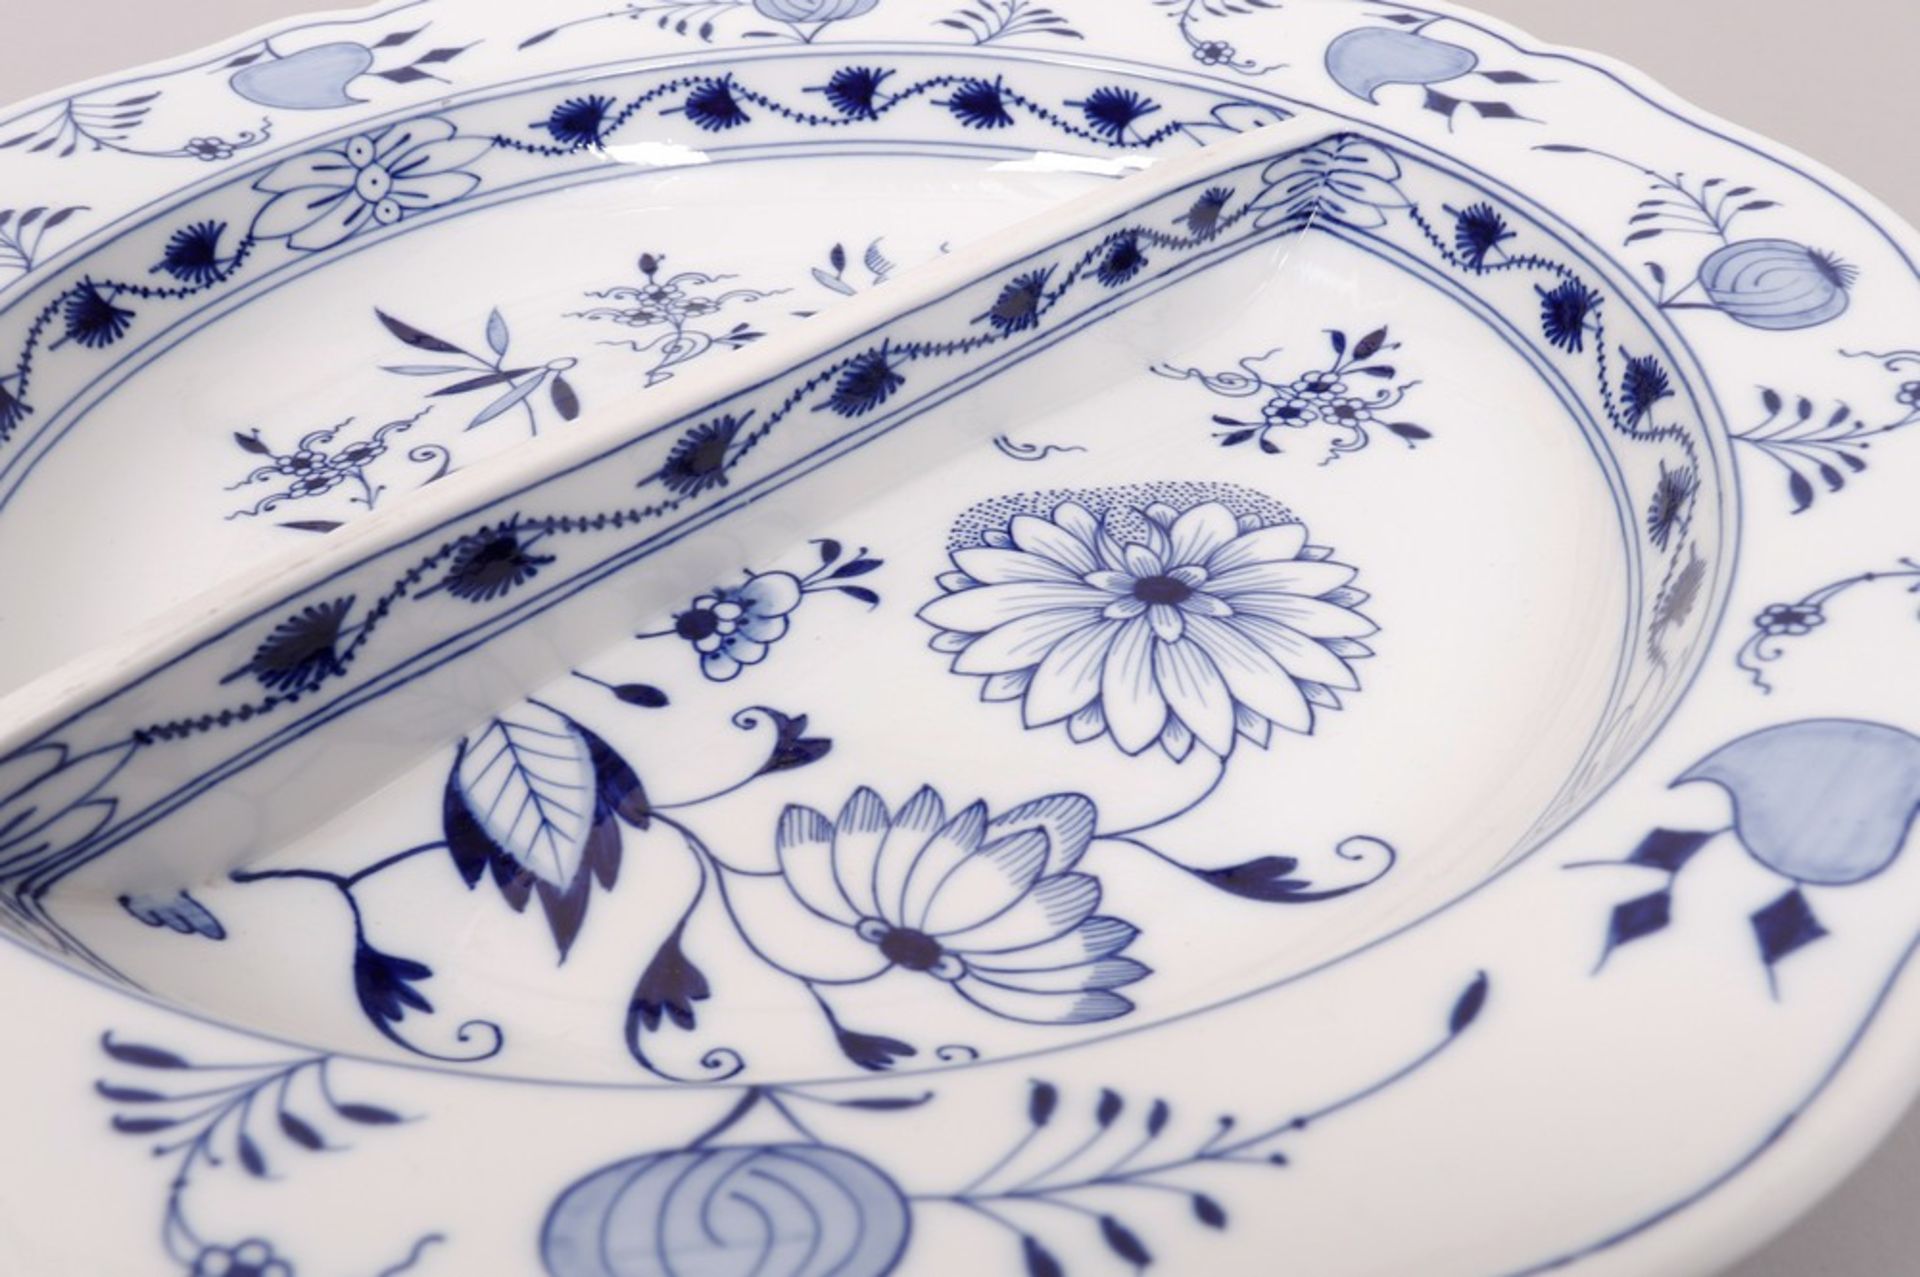 Large serving dish, Meissen, 2nd half 19th C. - Image 2 of 4